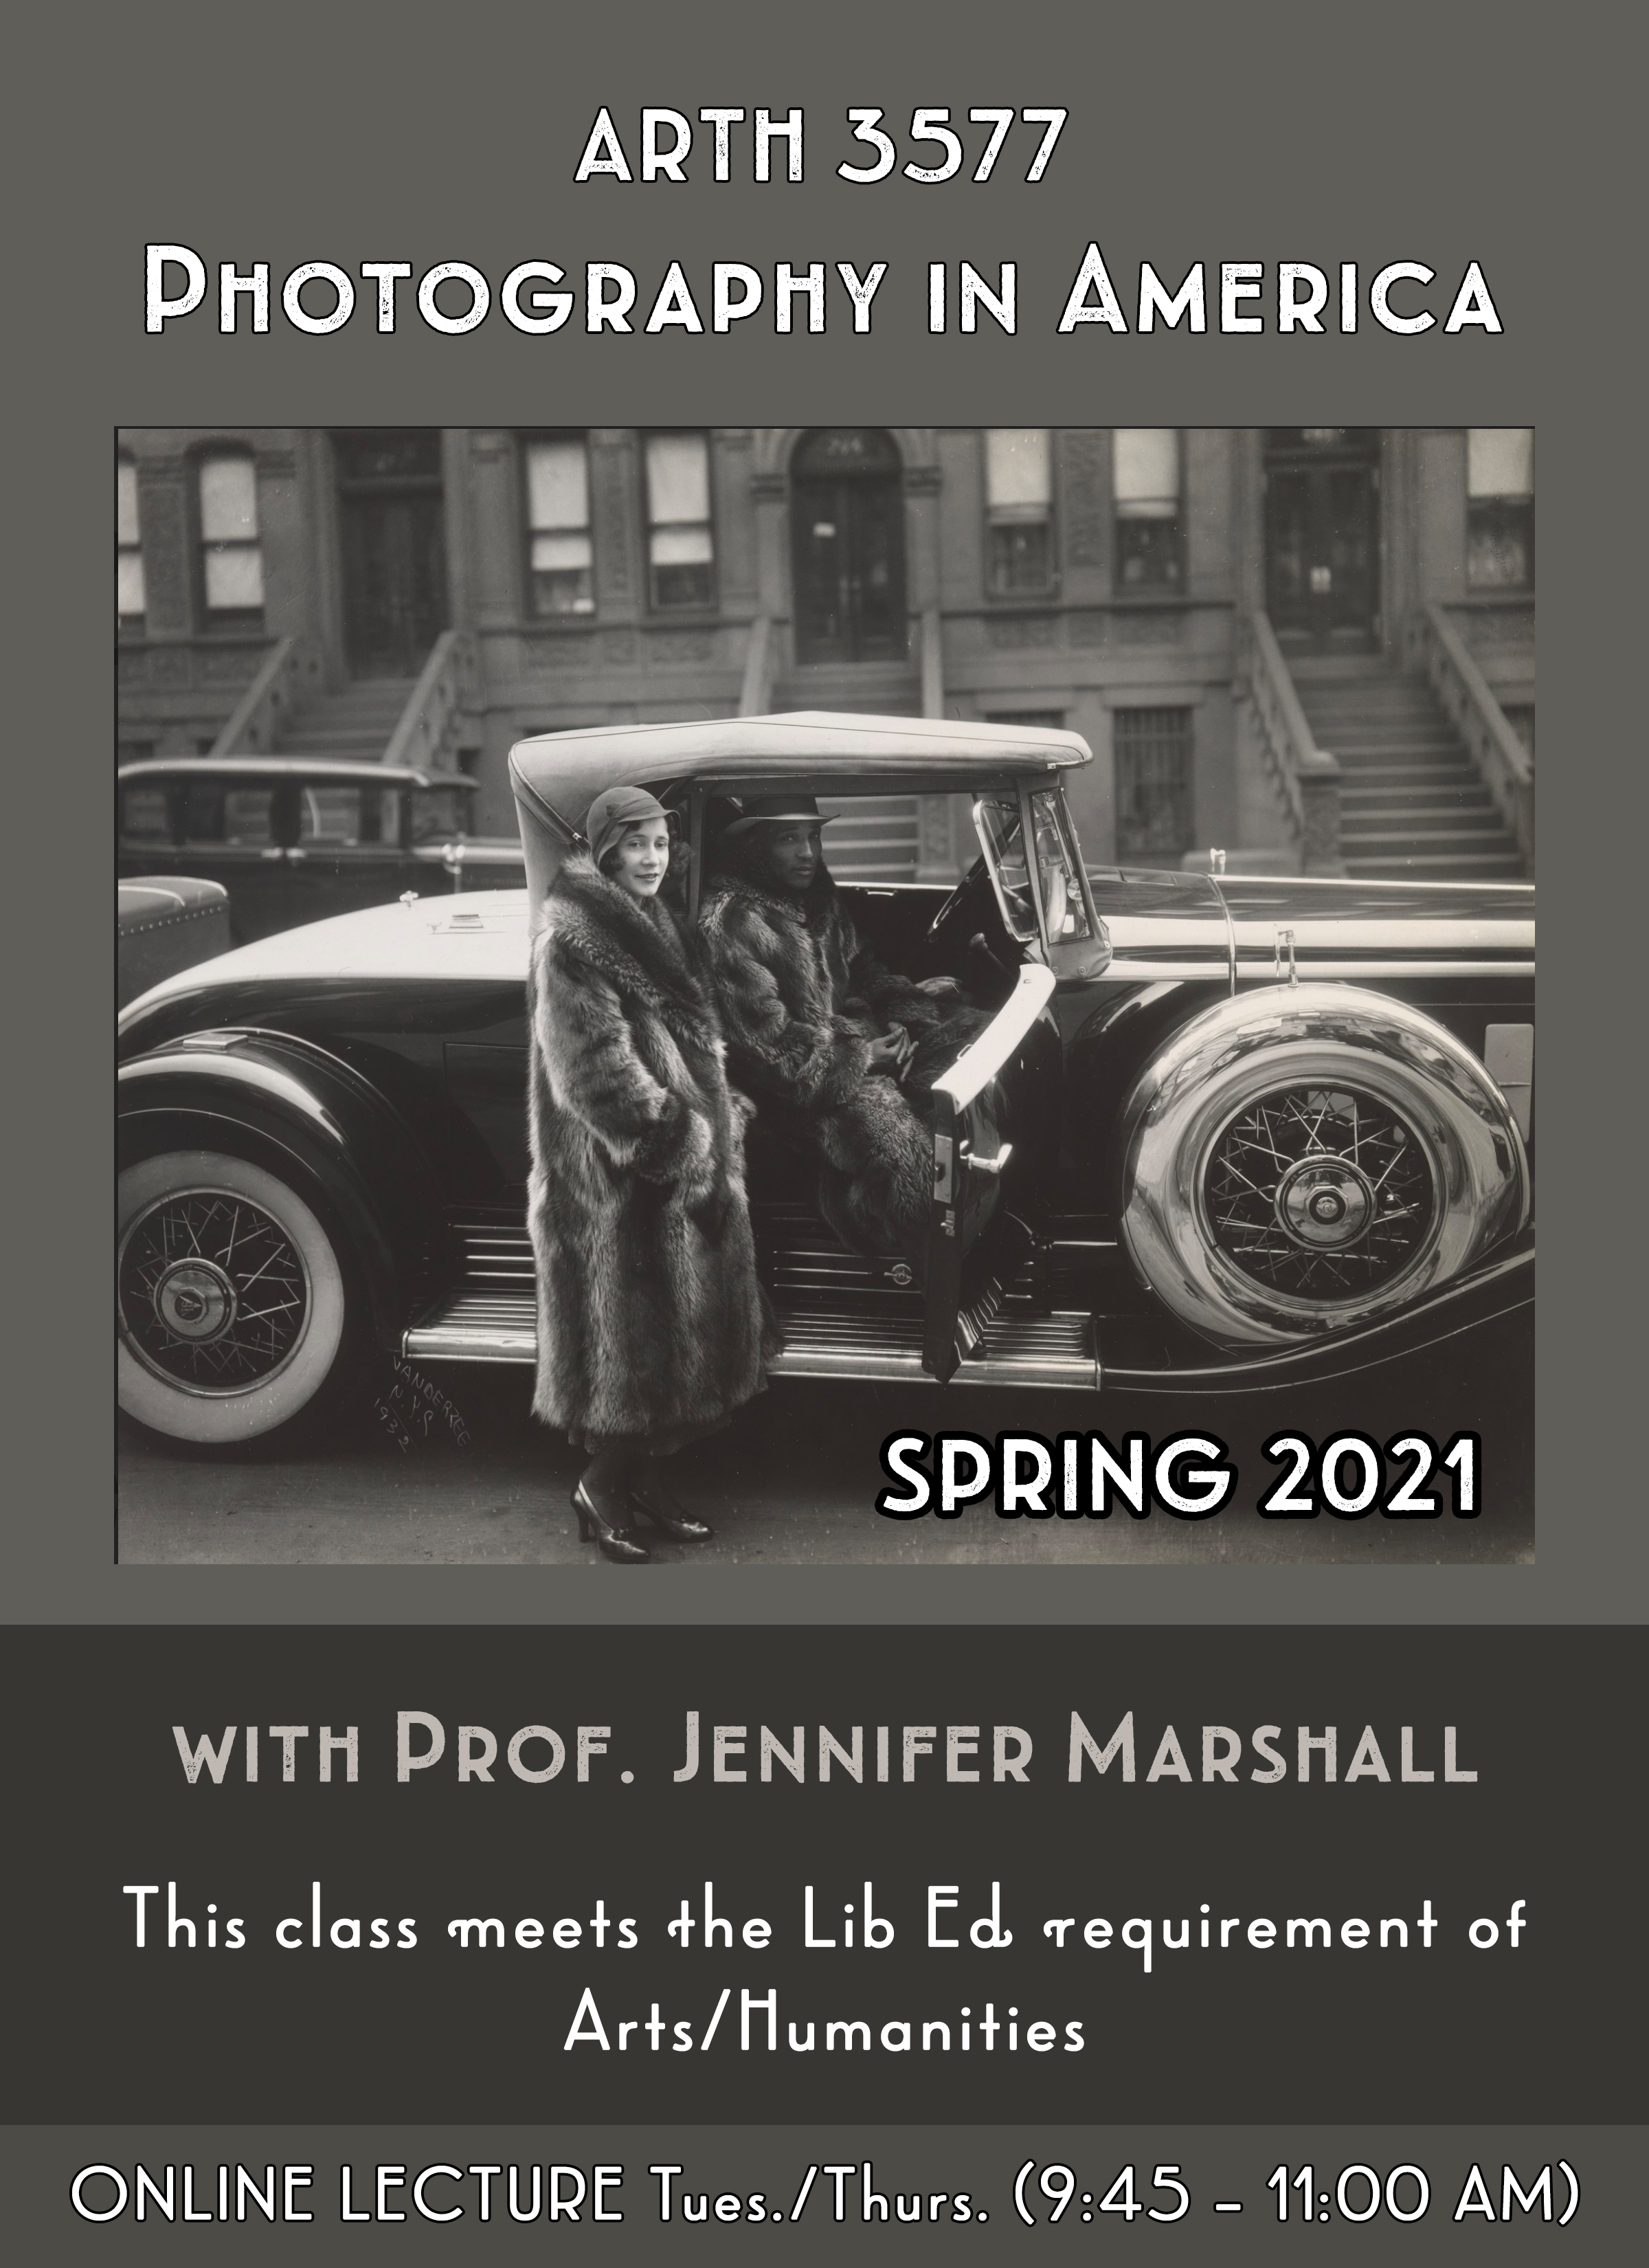 Course poster ARTH 3577 Photography in America with Prof. Jennifer Marshall. Image is of a black and white photo of a couple standing next to a vintage car. Spring 2021. This class meets the Lib Ed requirement of Arts/Humanities. Online lecture Tues/Thur 